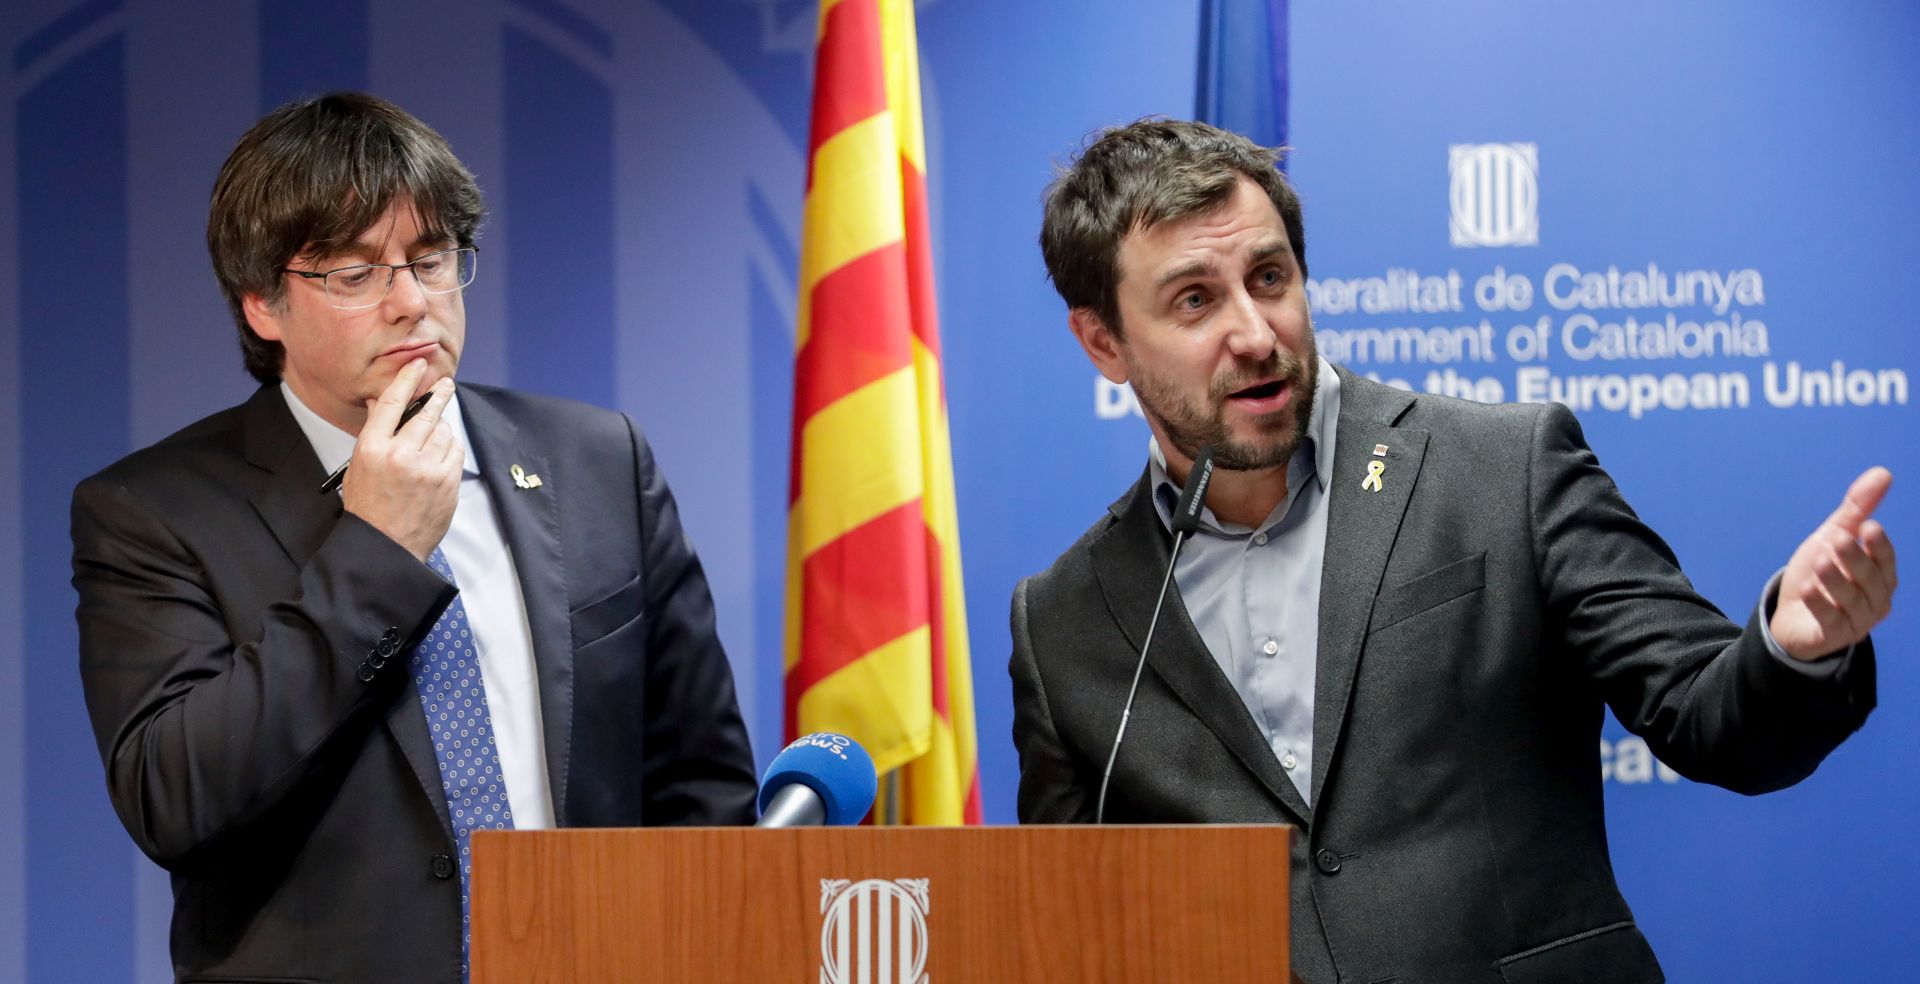 epa08082243 Former Catalan leader Carles Puigdemont (L) and dismissed Catalan regional Minister of Health Antoni Comin (R) gives a press conference after the decision of the European Court of Justice in Brussels, Belgium, 19 December 2019. The European Court of Justice has ruled on 19 December that Catalan separatist leader Oriol Junqueras has an MEP immunity when he was jailed by the Spanish Supreme Court in October, prompting calls for his immediate release.  EPA/STEPHANIE LECOCQ